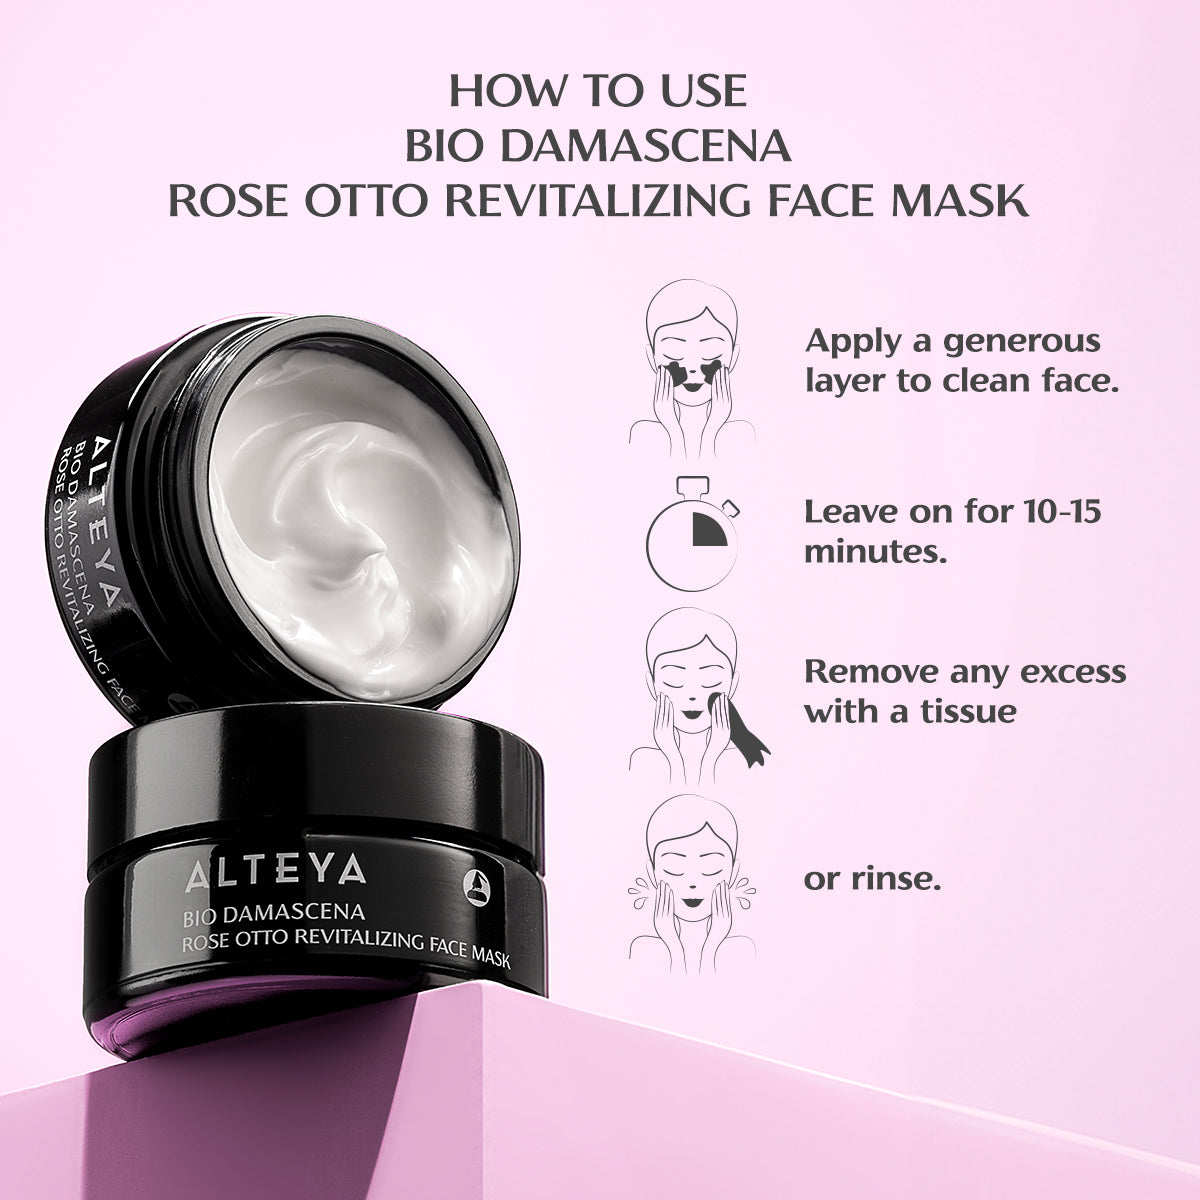 Product advertisement for BIO DAMASCENA ROSE OTTO REVITALIZING FACE MASK, designed to leave you with a glowing complexion. Instructions: Apply evenly to clean, dry